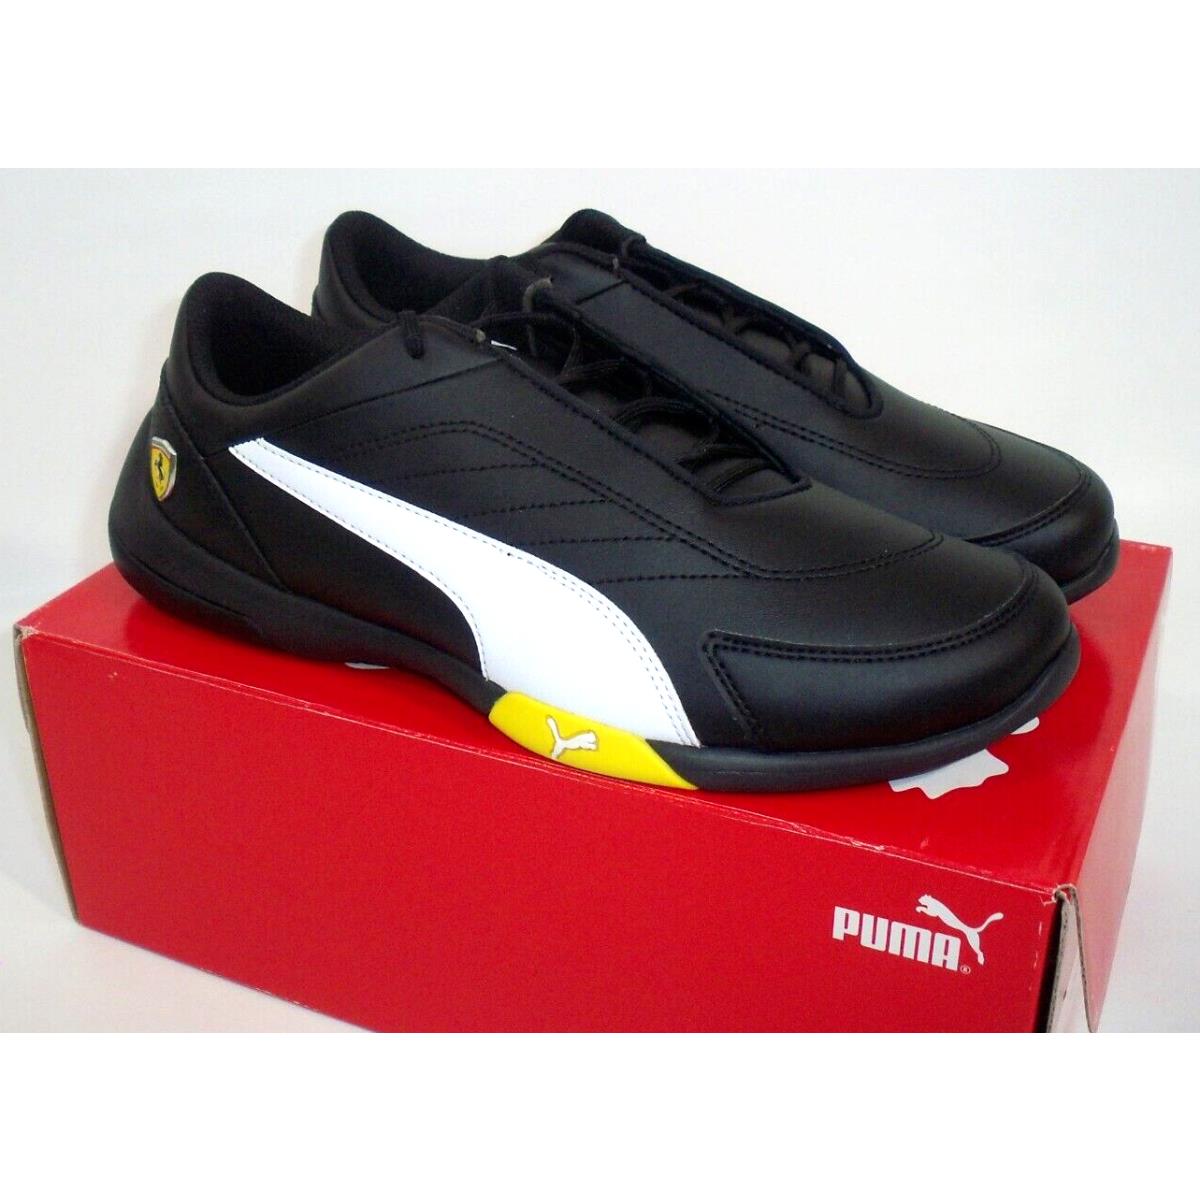 Puma shoes  - Black , Black, White, and Blazing Yellow Manufacturer 5